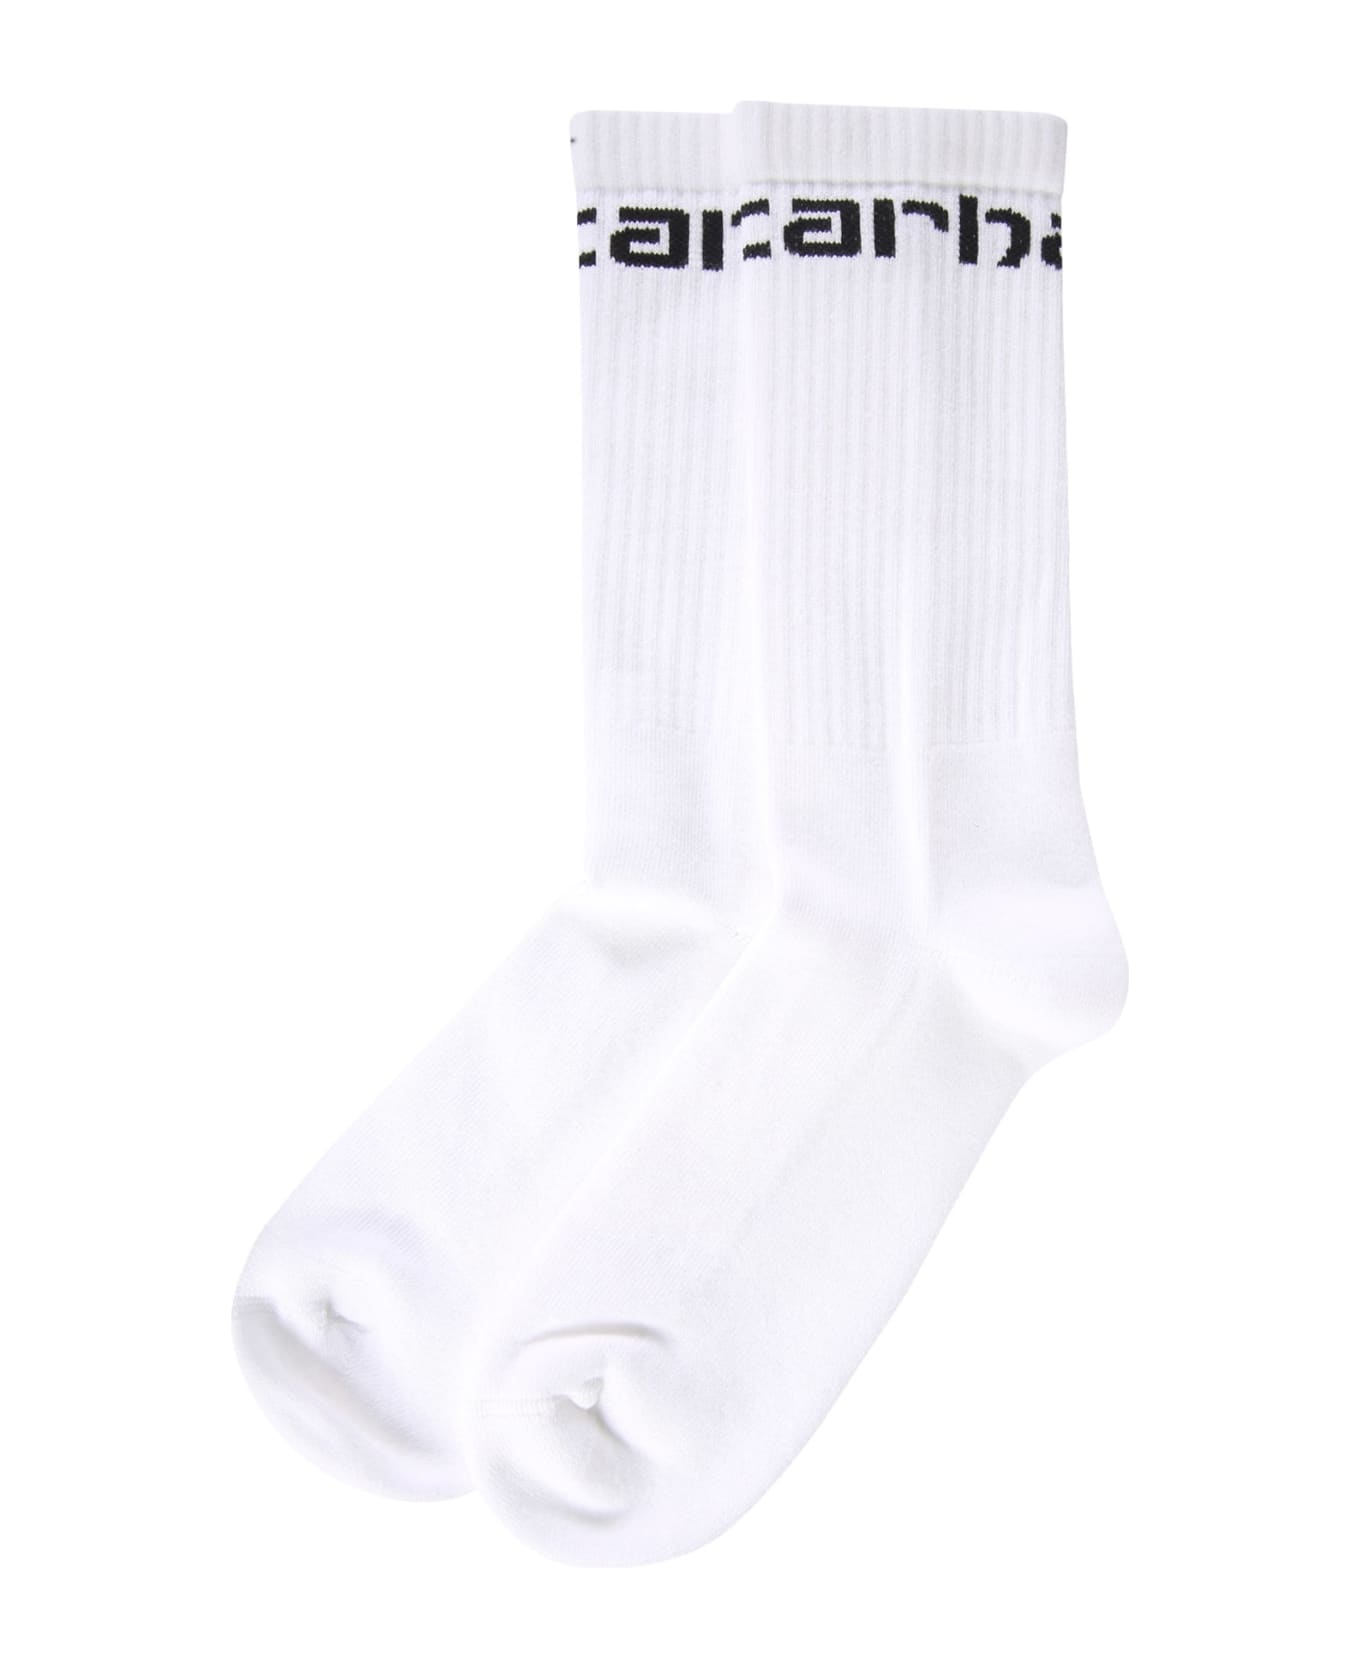 Carhartt Socks With Logo Embroidered - White